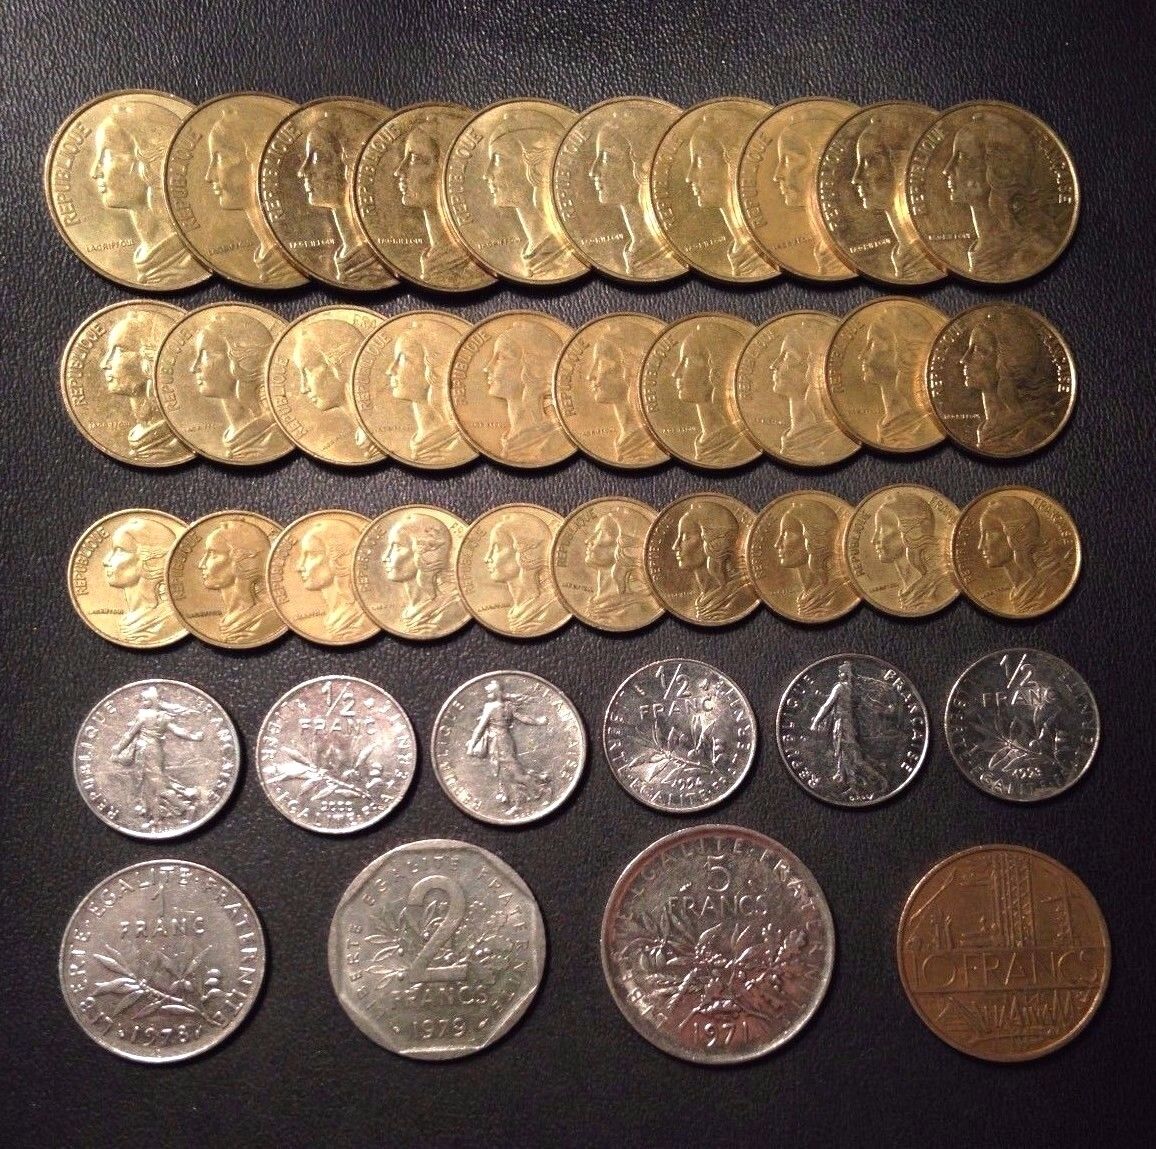 Old France Coin Lot - Big Lot - 40 High Quality Coins - 